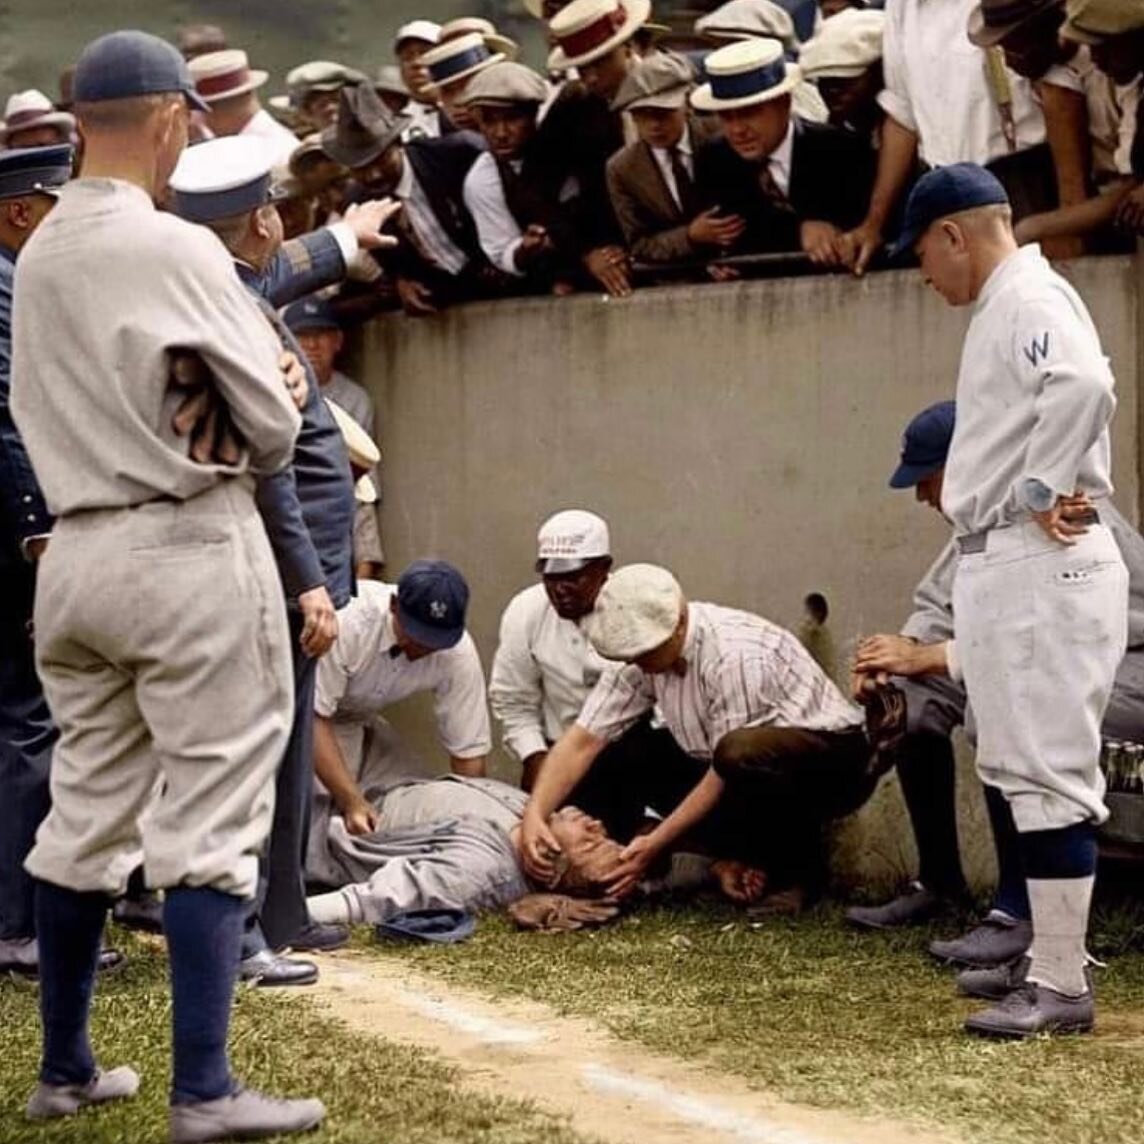 Caption tbd

Babe Ruth 1924 after running into a wall